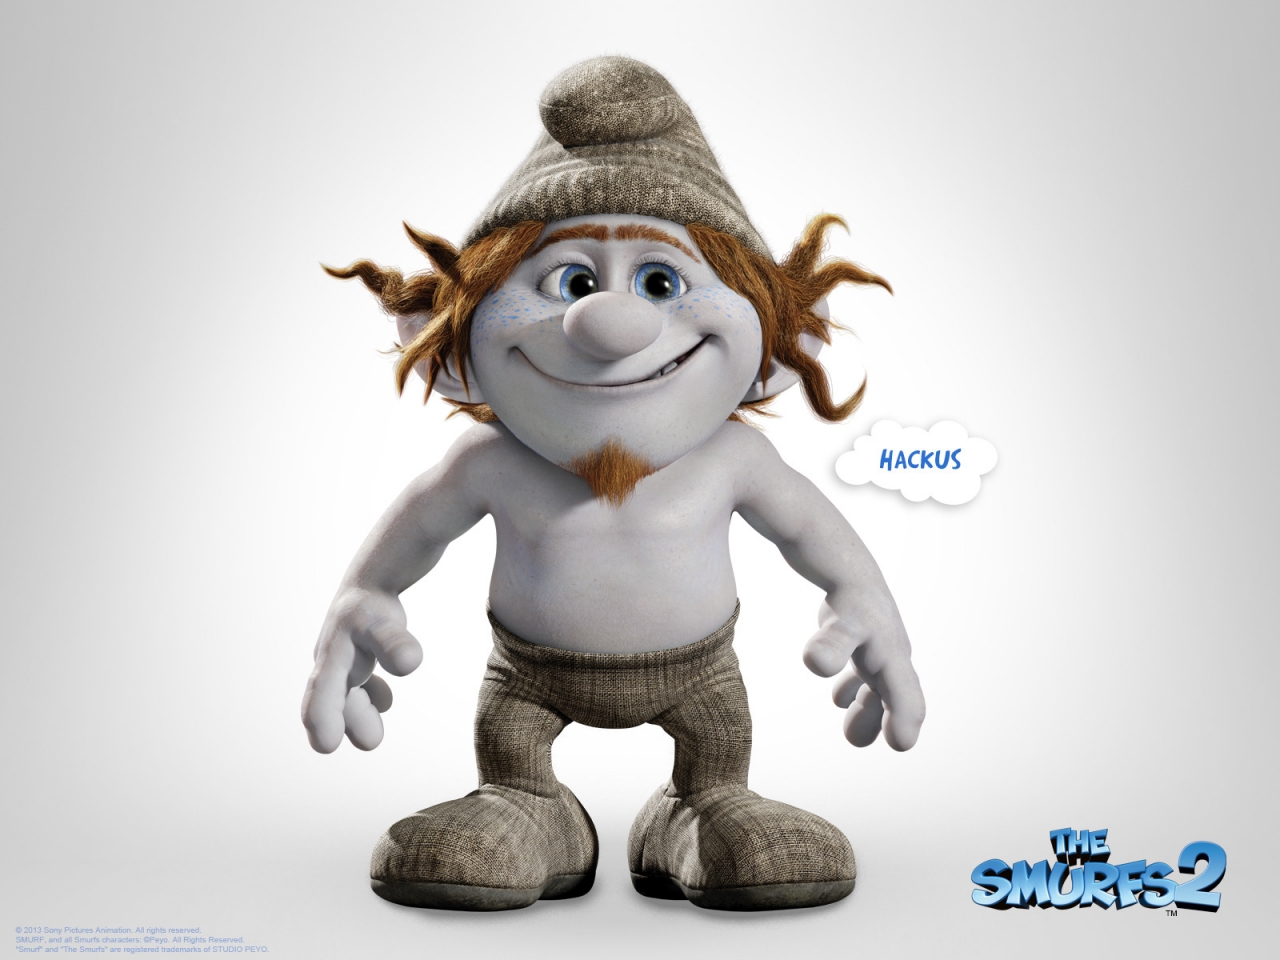 Hachus The Smurfs 2 for 1280 x 960 resolution